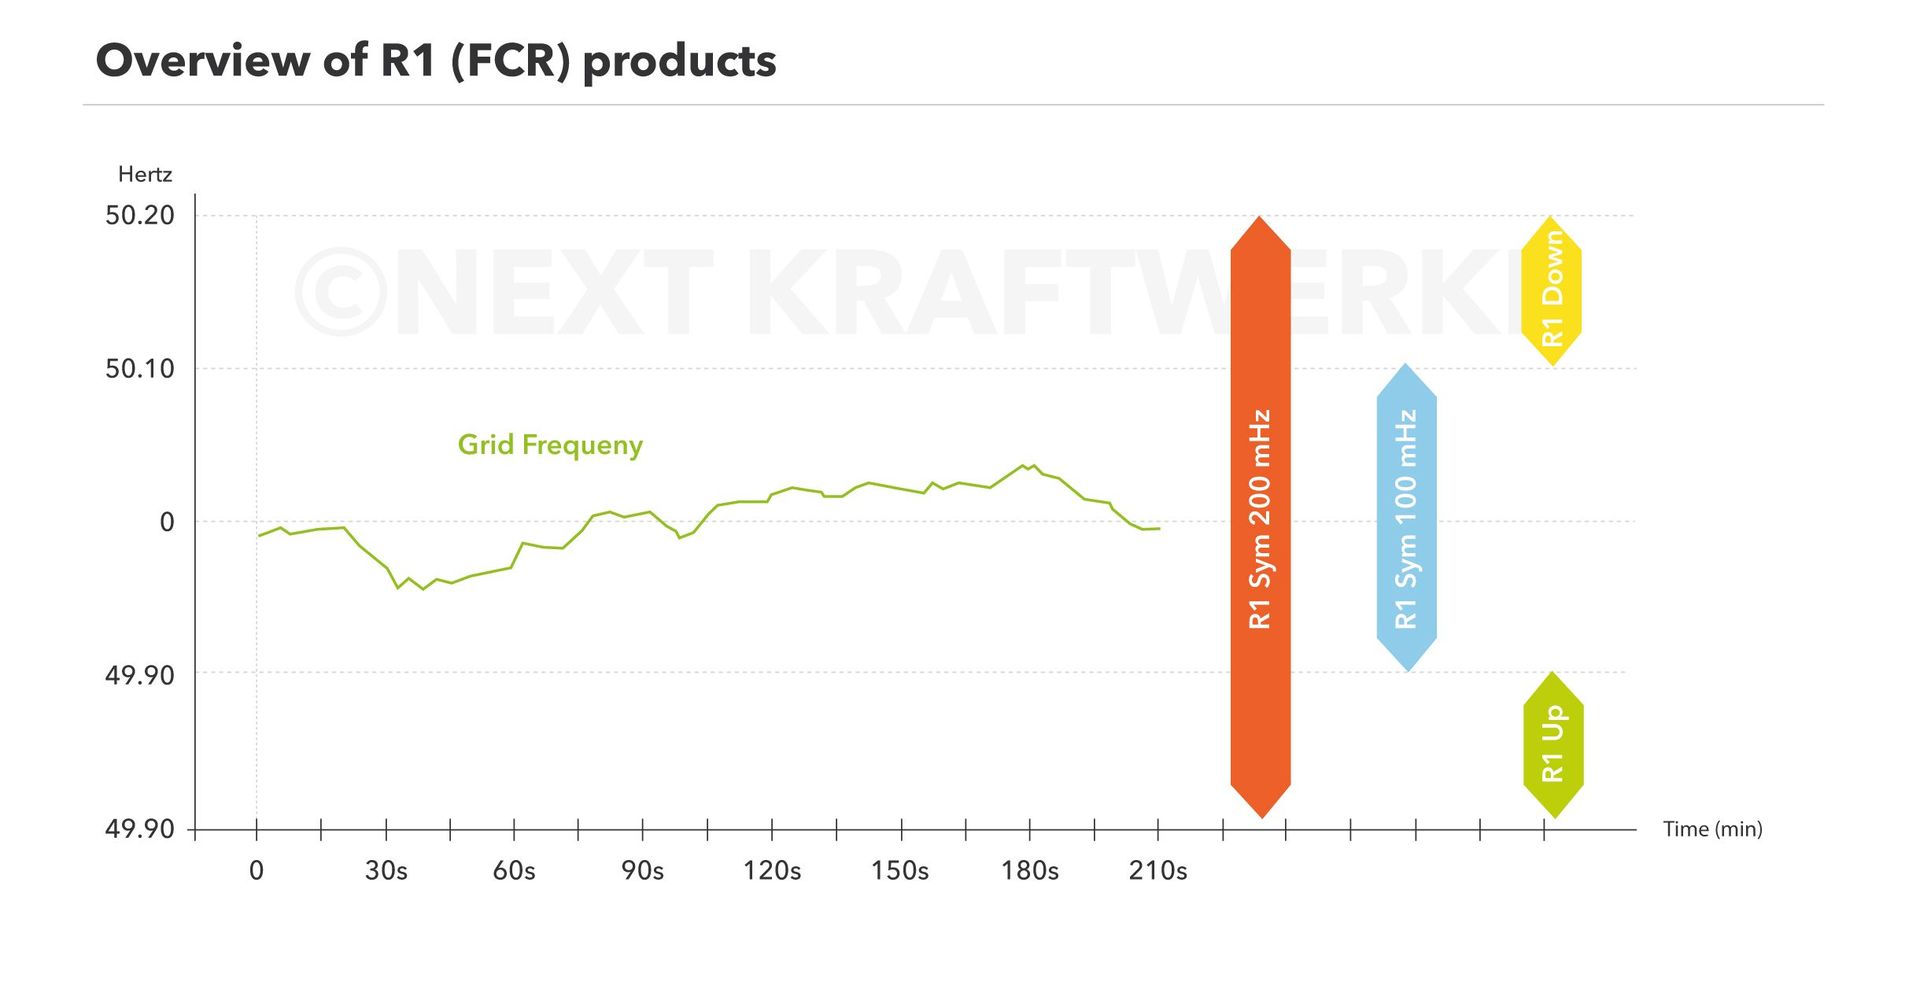 Overview of primary reserve power (FCR/R1) products